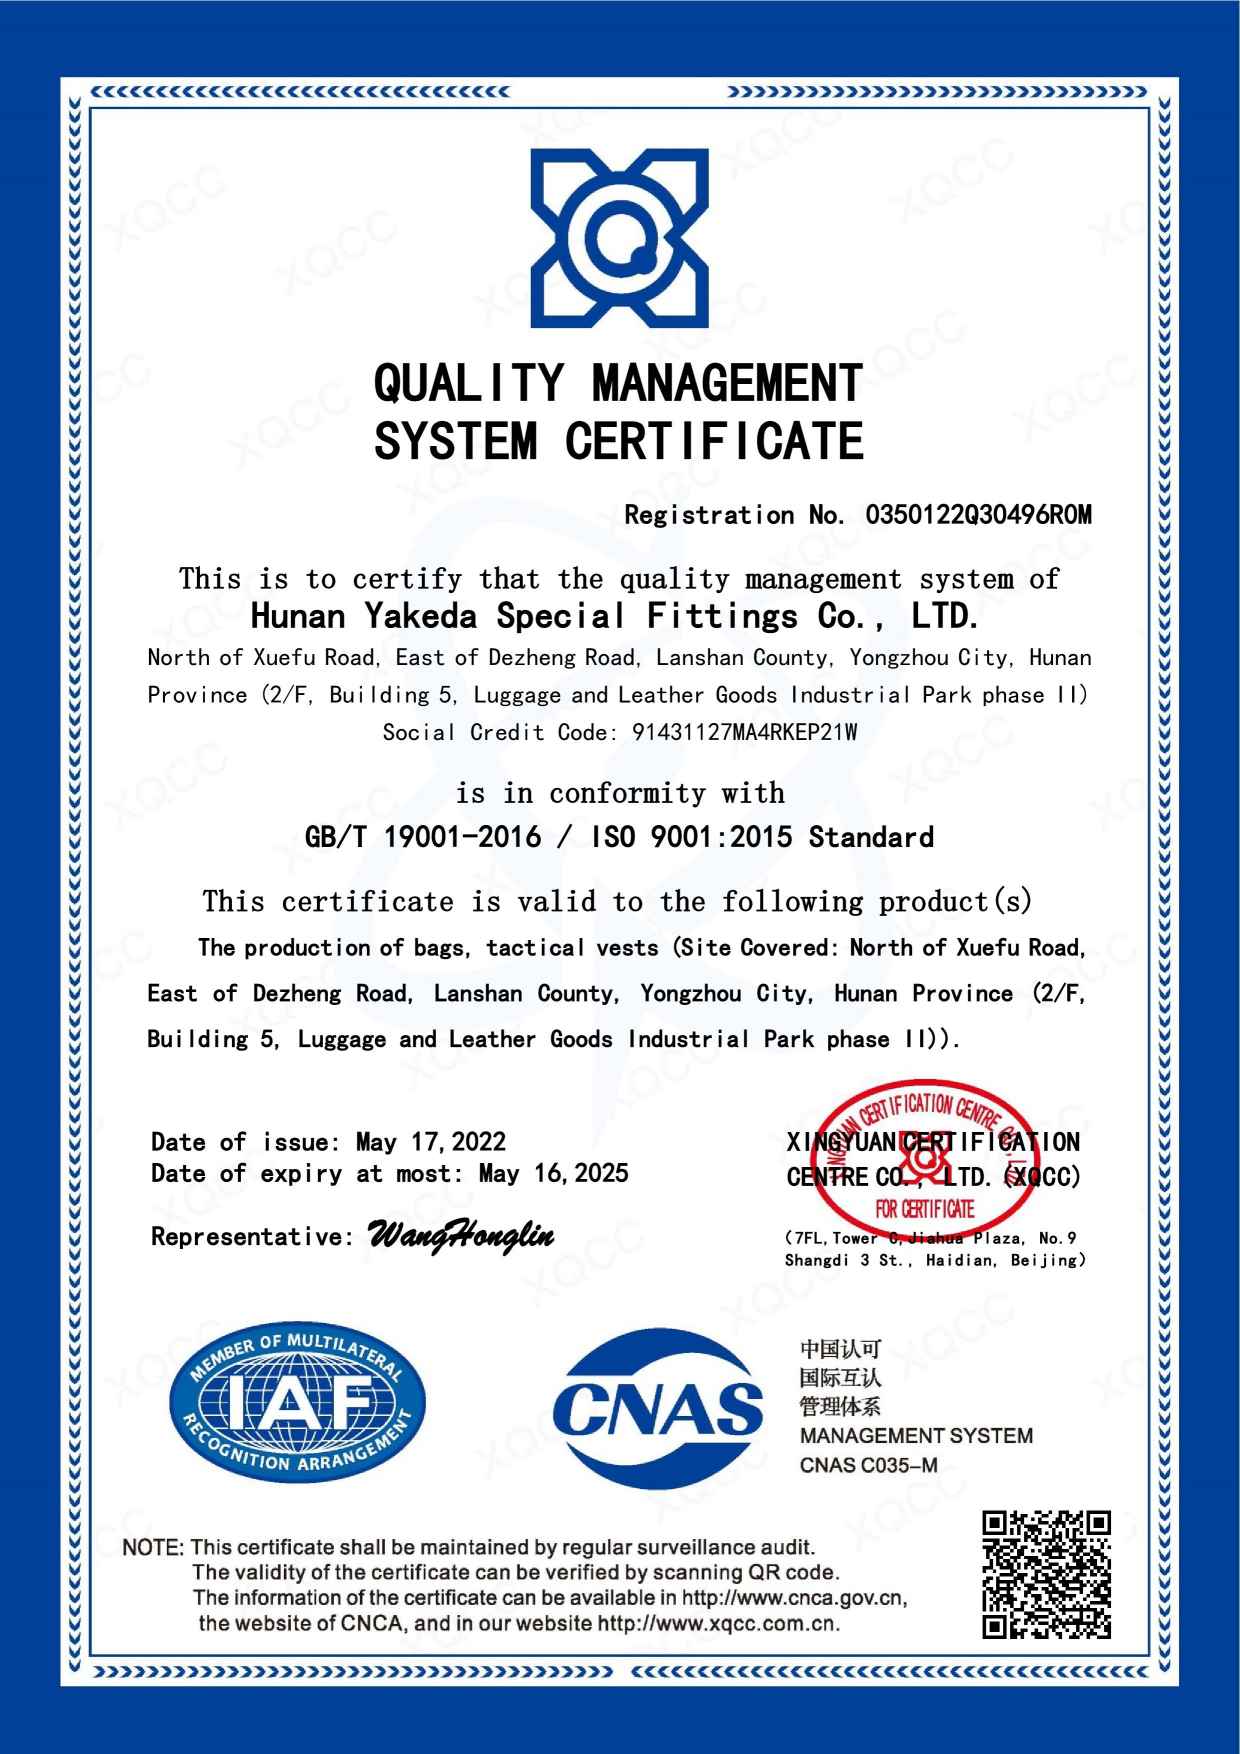 Norme ISO 9001:2015